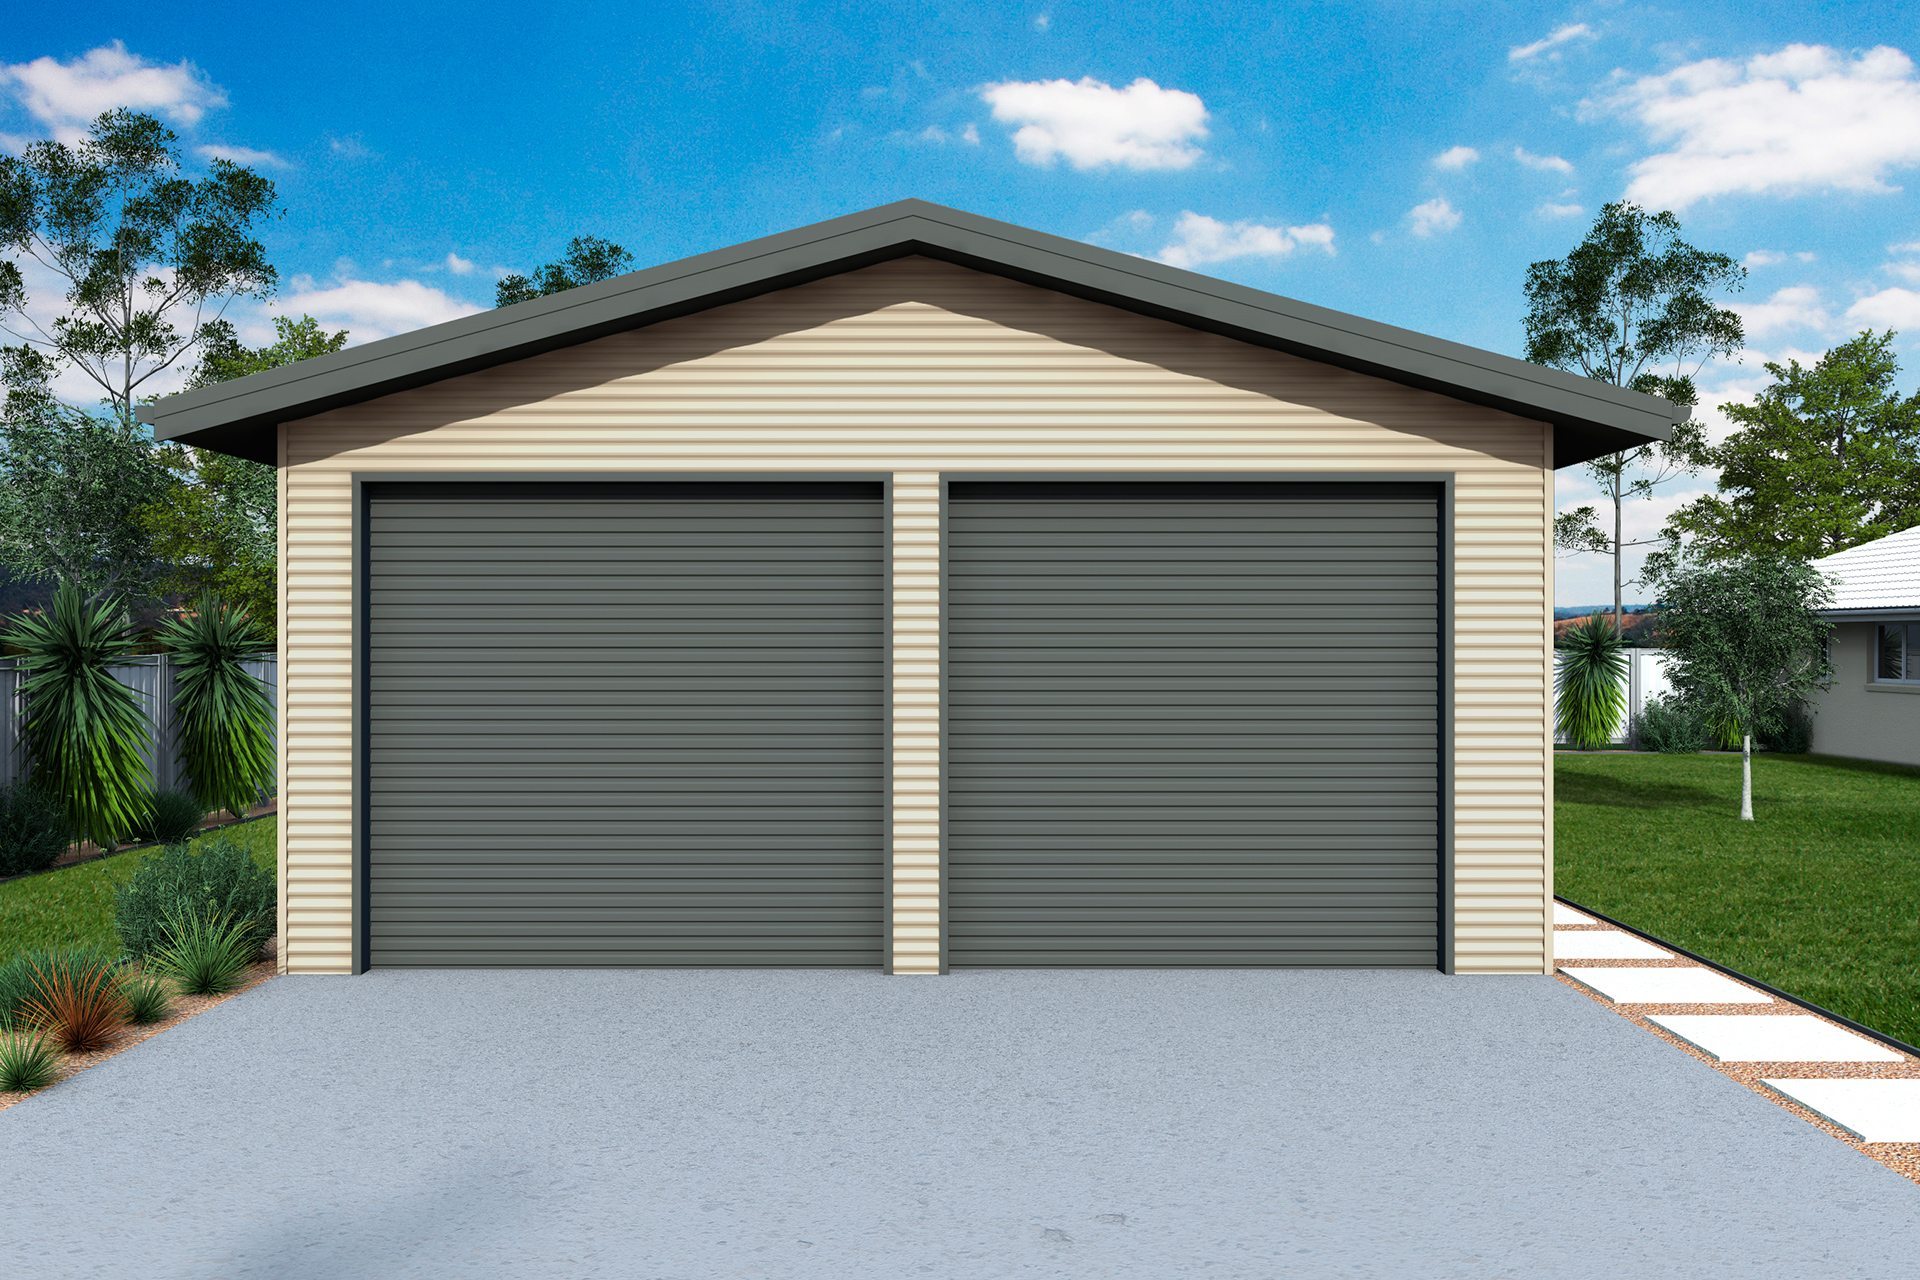 Garages and Sheds with Eaves for Sale - Ranbuild